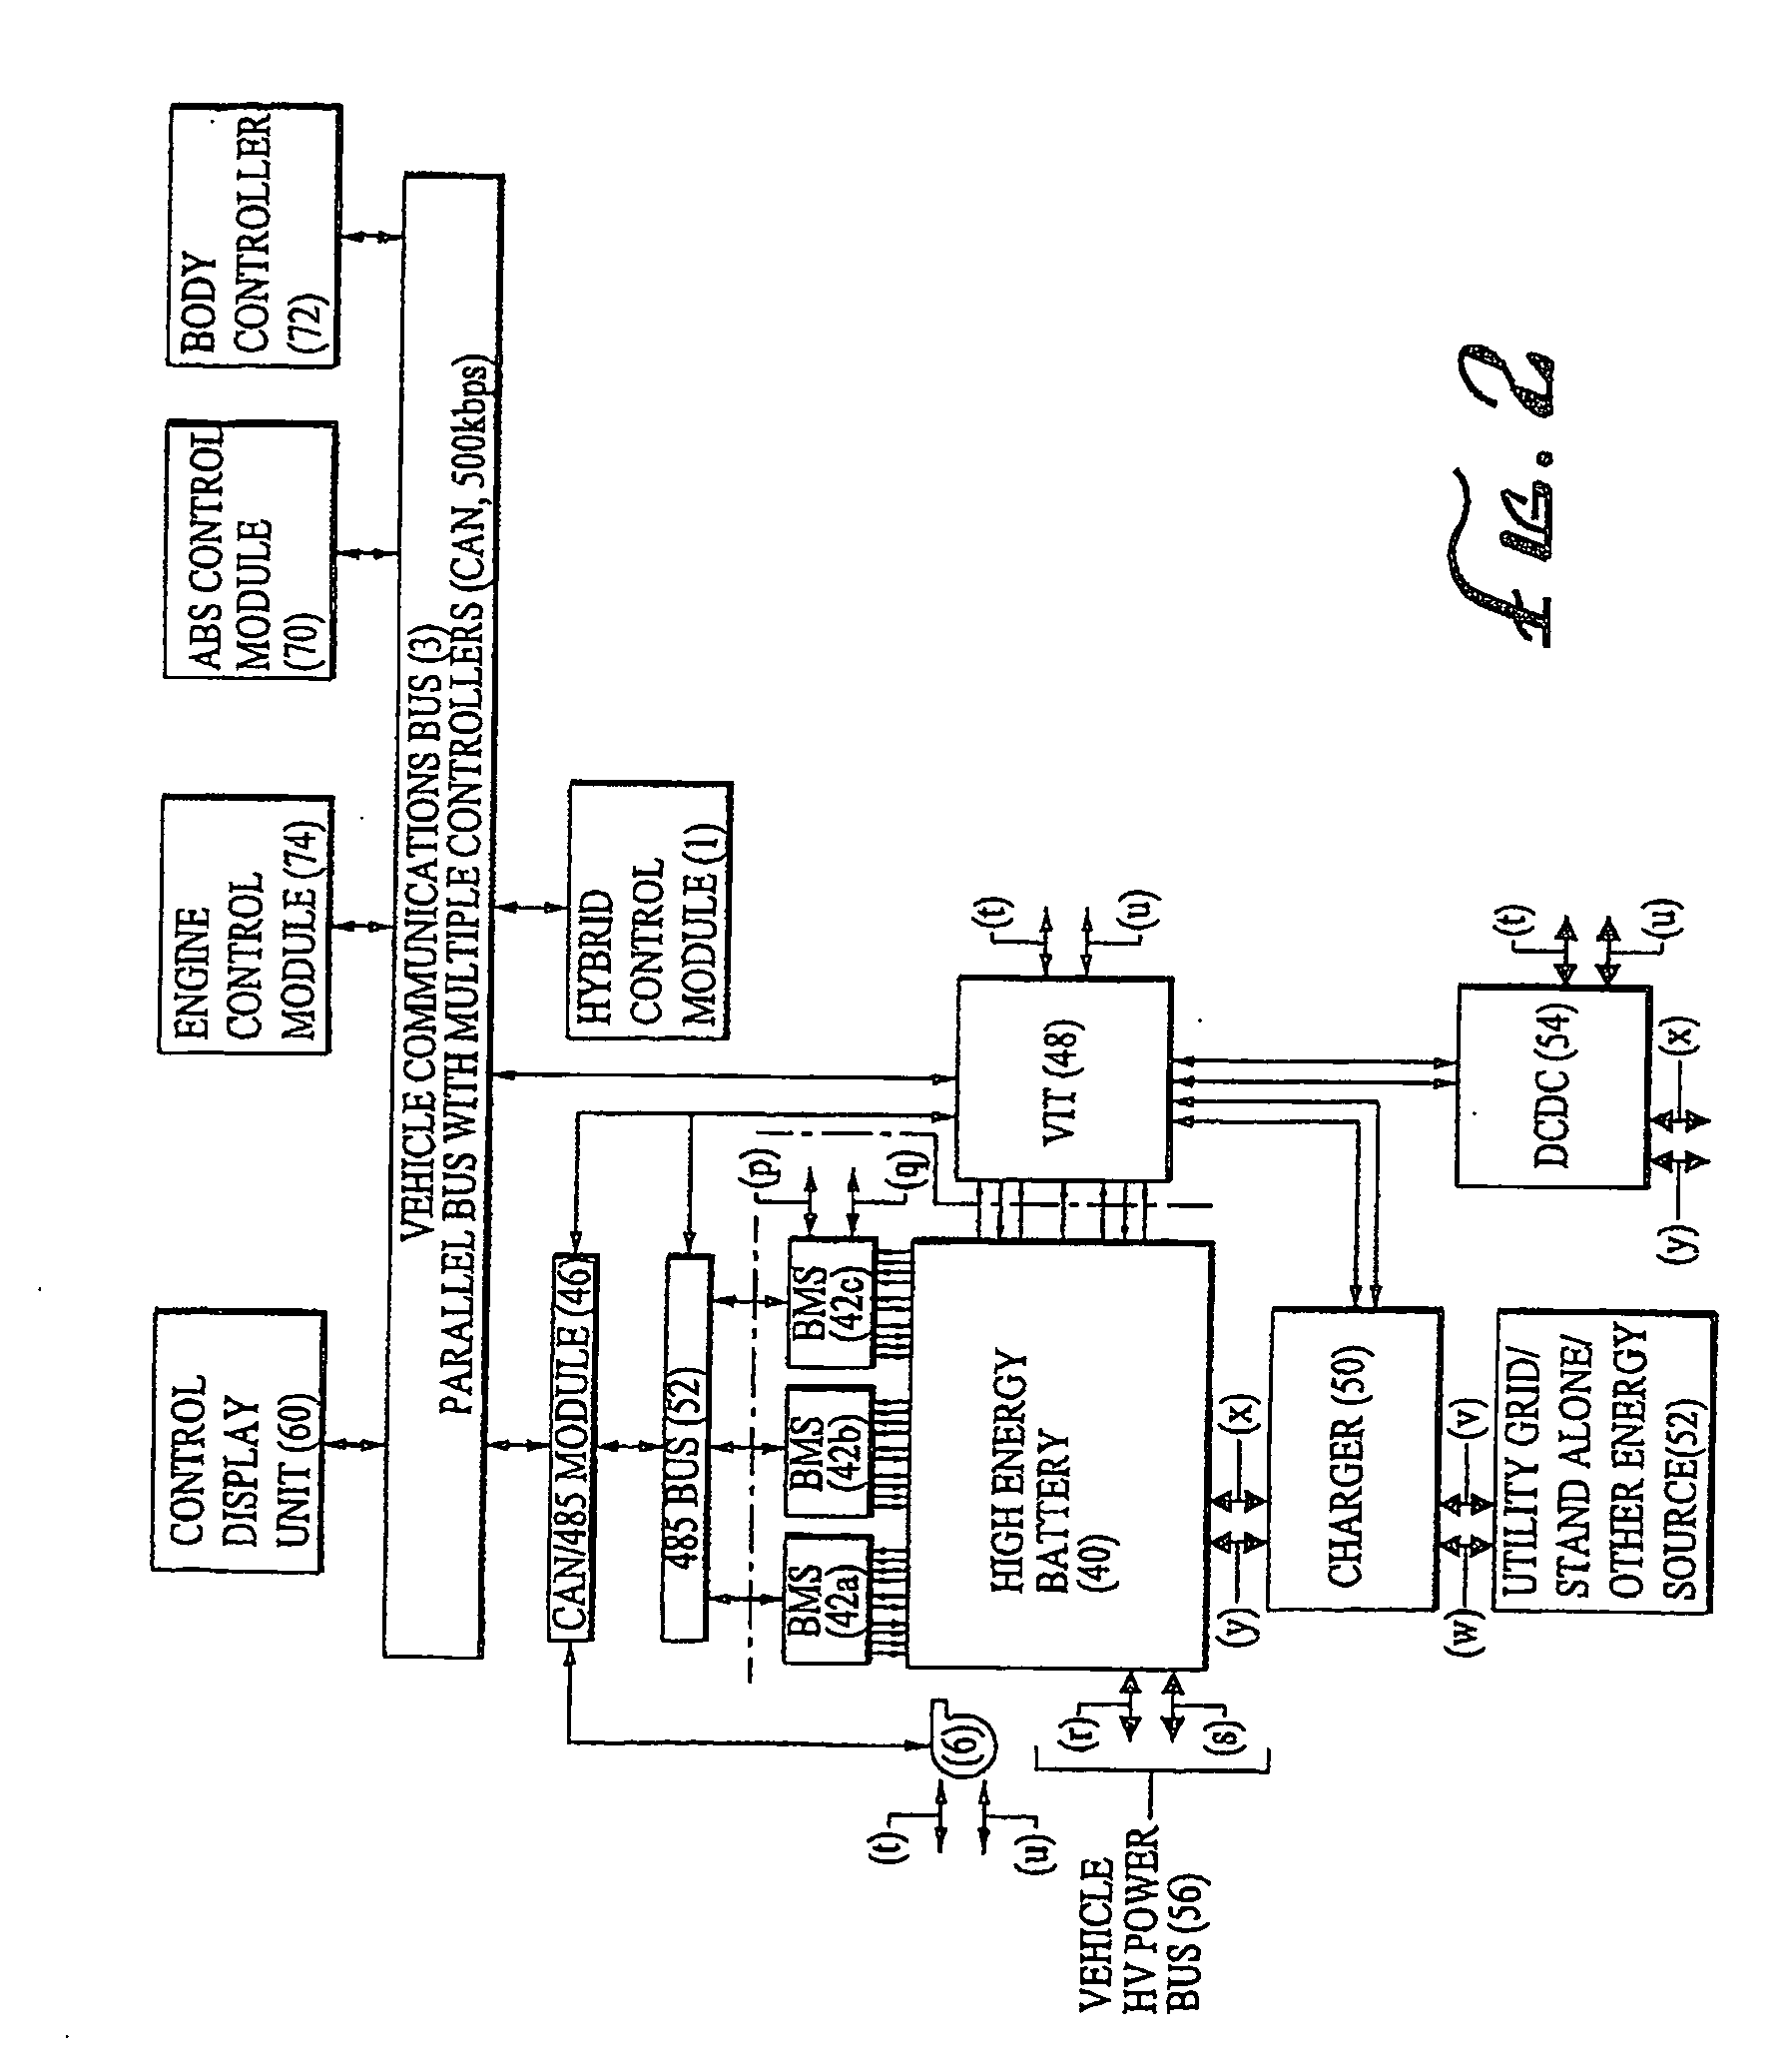 Method And System For Retrofitting A Full Hybrid To Be A Plug-In Hybrid